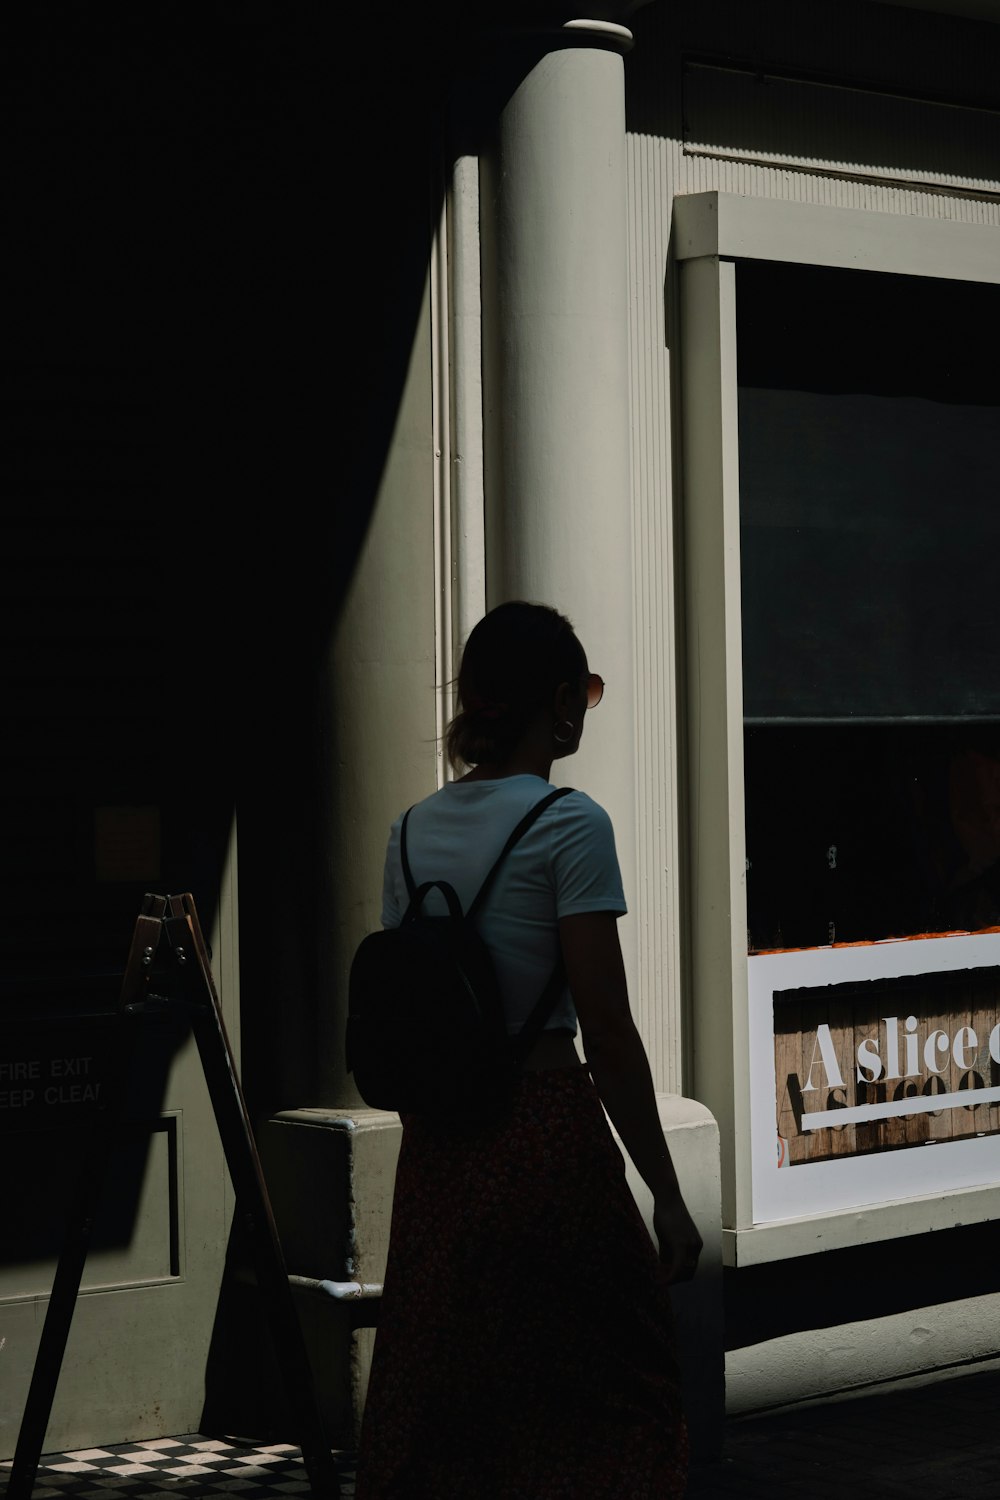 a woman standing in front of a window with a sign on it